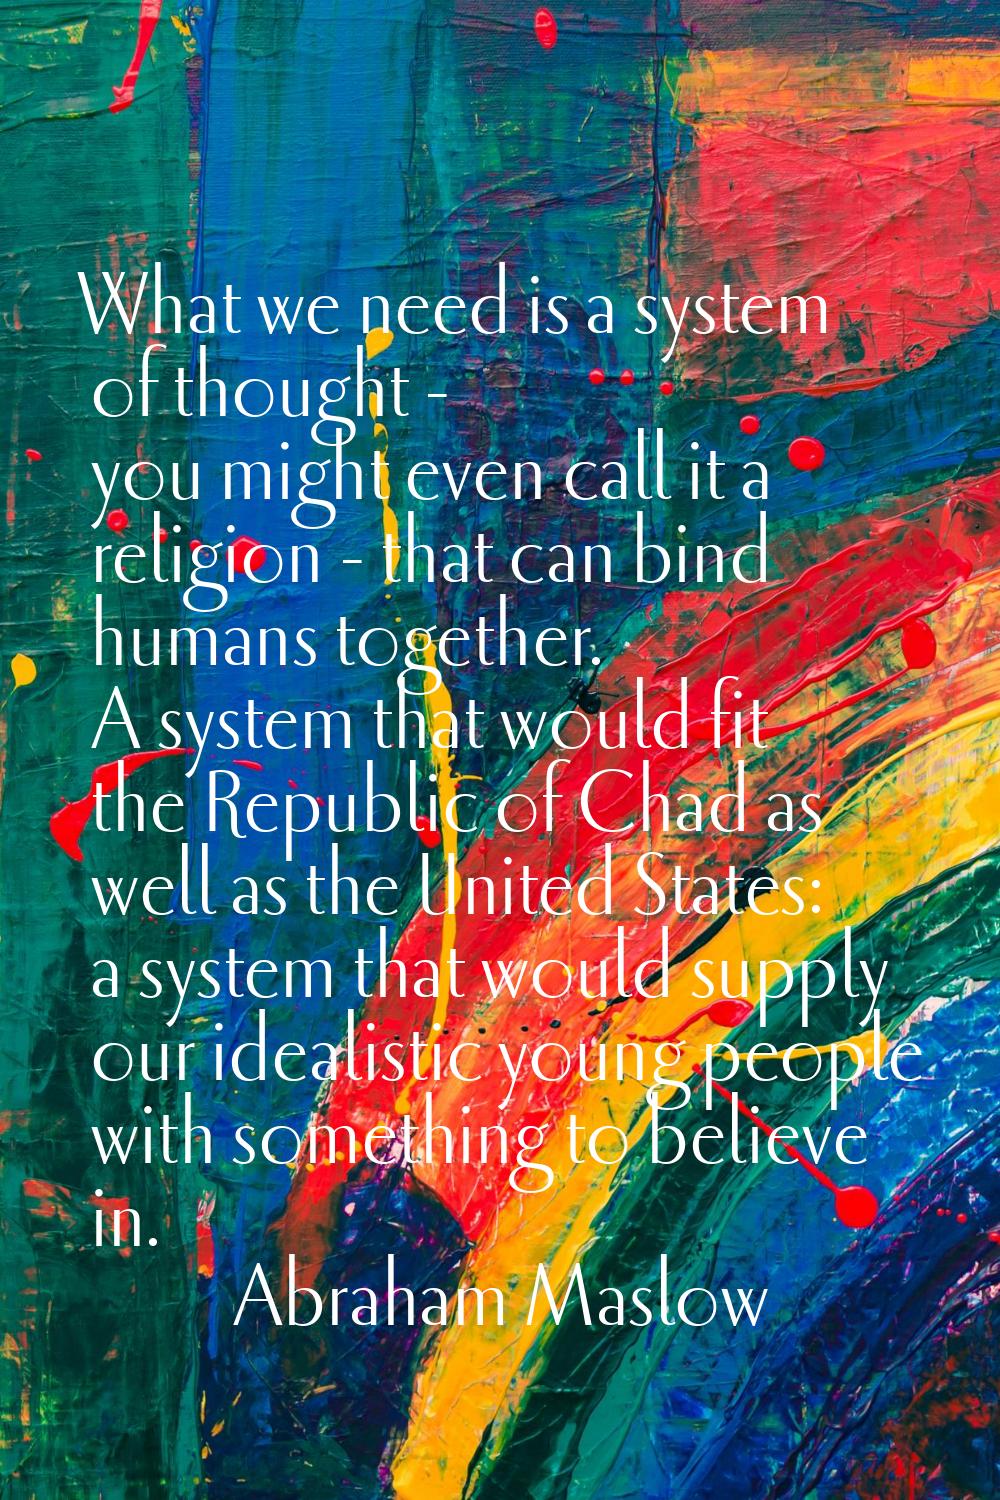 What we need is a system of thought - you might even call it a religion - that can bind humans toge